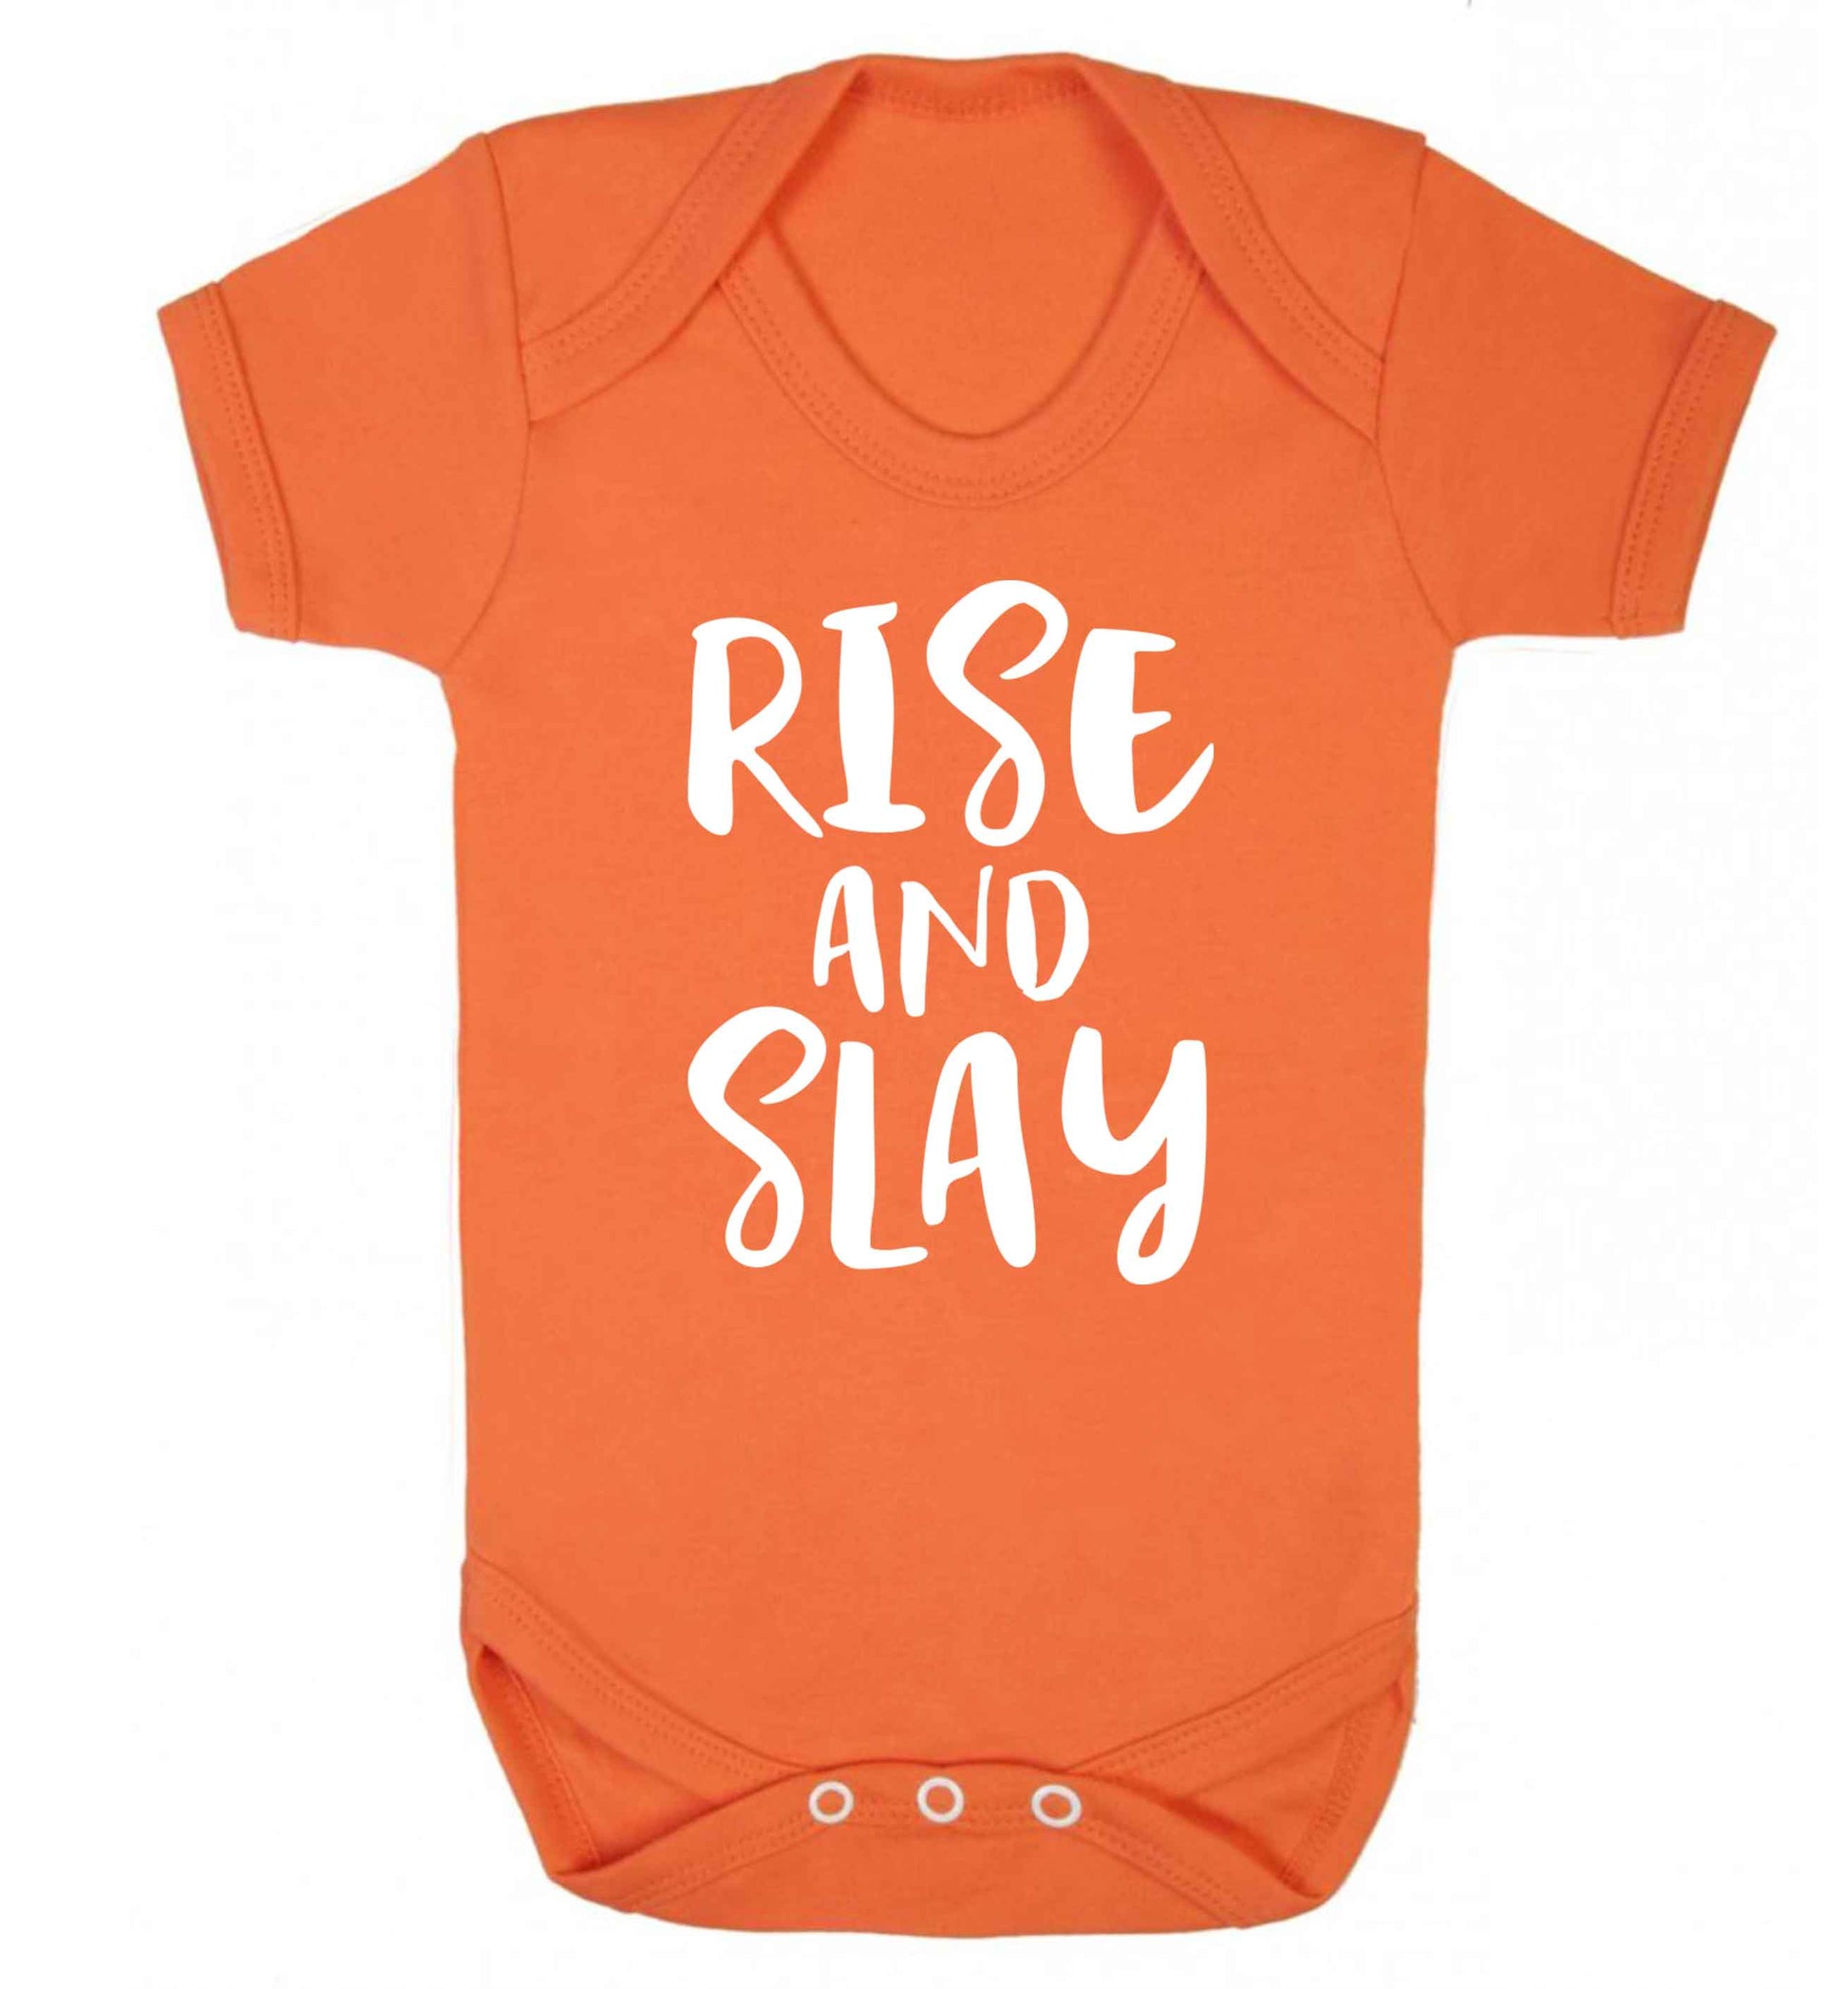 Rise and slay Baby Vest orange 18-24 months